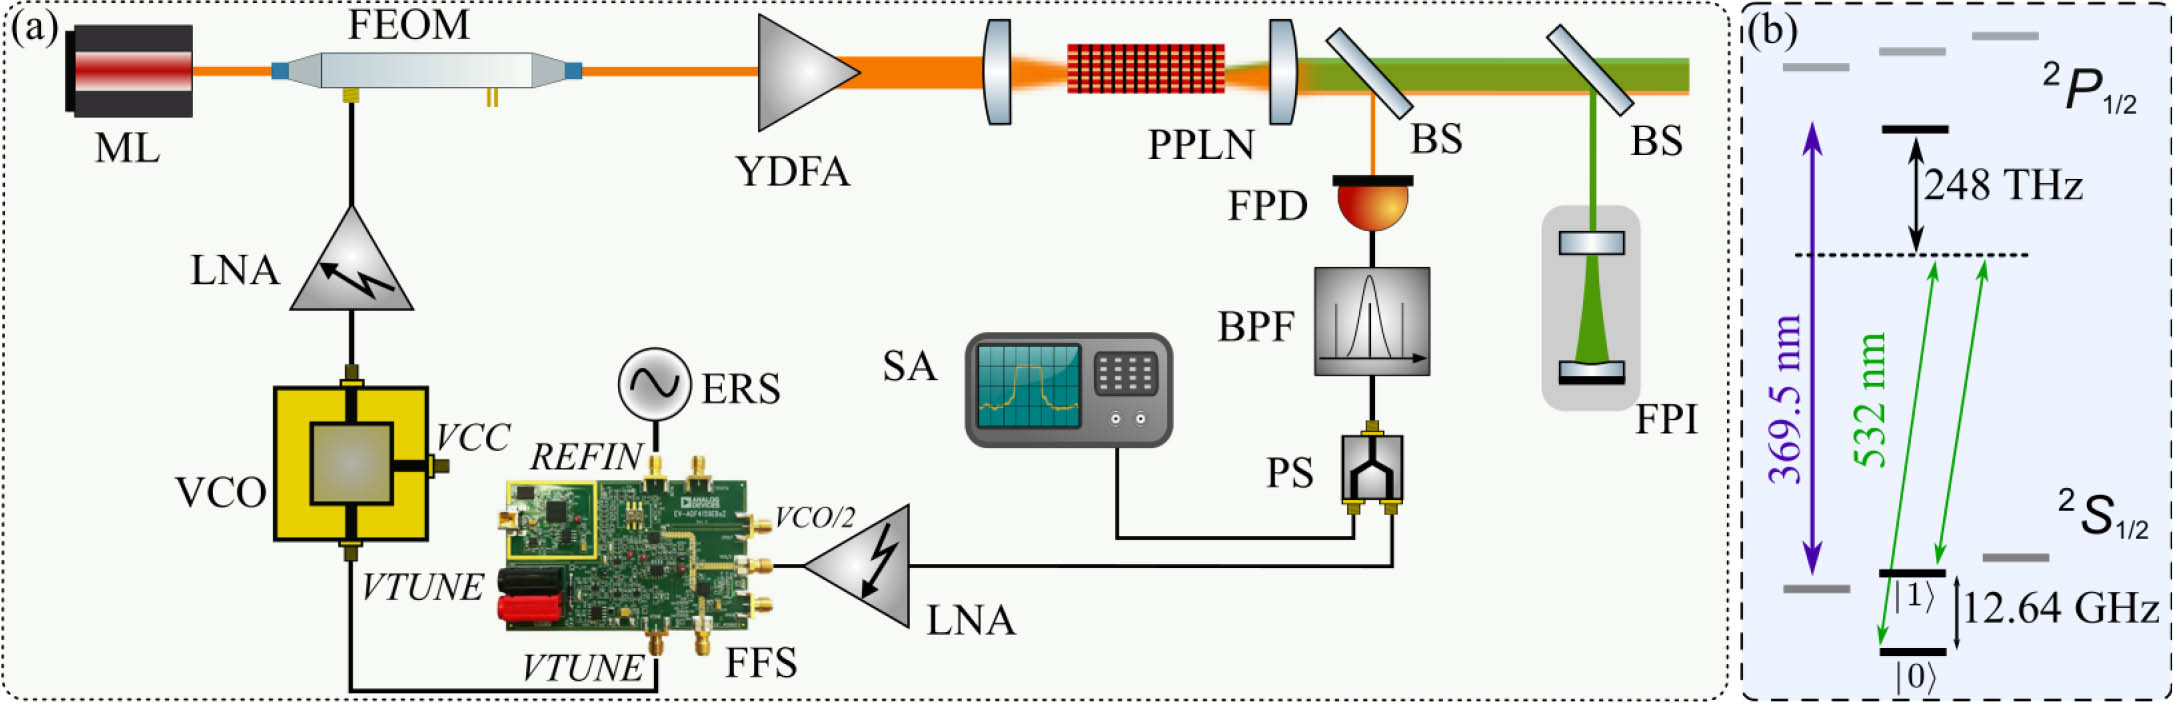 (a) Schematic of the experimental setup. Some concerned ports of the FFS chip and the VCO chip are marked by italics in the figure. (b) Energy level schematic of the 171Yb+ qubits. The energy levels associated with the stimulated Raman transition (SRT). Here, we utilize two 532 nm optical fields with a frequency difference of 12.64 GHz to implement the SRT. The transition wavelength for Doppler cooling is 369.5 nm. ML, monochromatic laser; FEOM, fiber electro-optic modulator; YDFA, ytterbium-doped fiber amplifier; BS, beam splitter; PPLN, periodically polarized lithium niobate; LNA, low-noise amplifier; FPD, fast photoelectric detector; VCO, voltage-controlled oscillator; ERS, external reference signal; PS, power splitter; SA, spectrum analyzer; FFS, fractional-N frequency synthesizer; FPI, Fabry–Pérot interferometer.